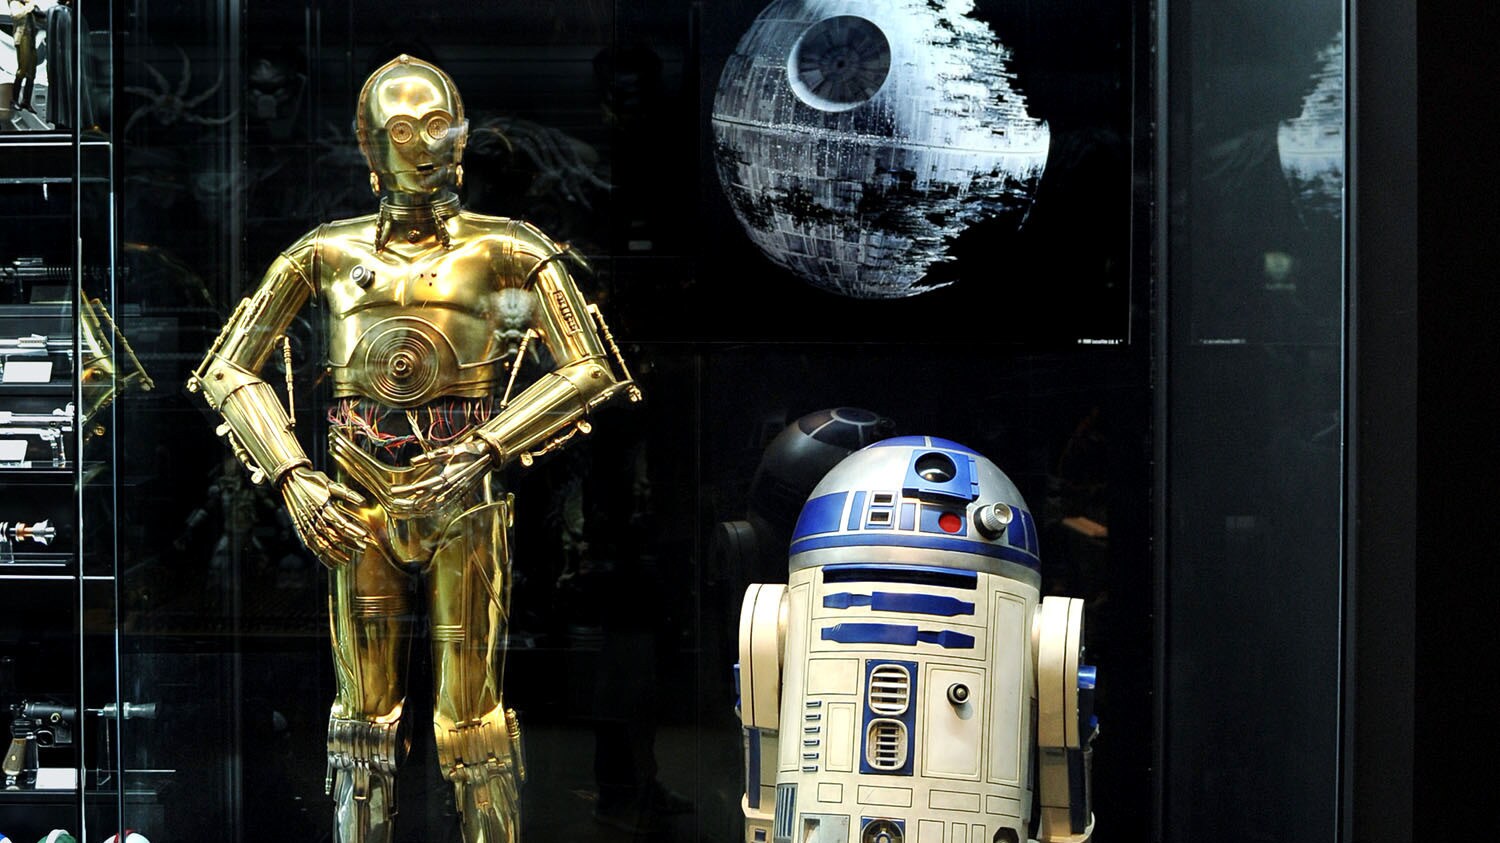 Cho Woong - Star Wars collection: R2-D2 and C-3PO